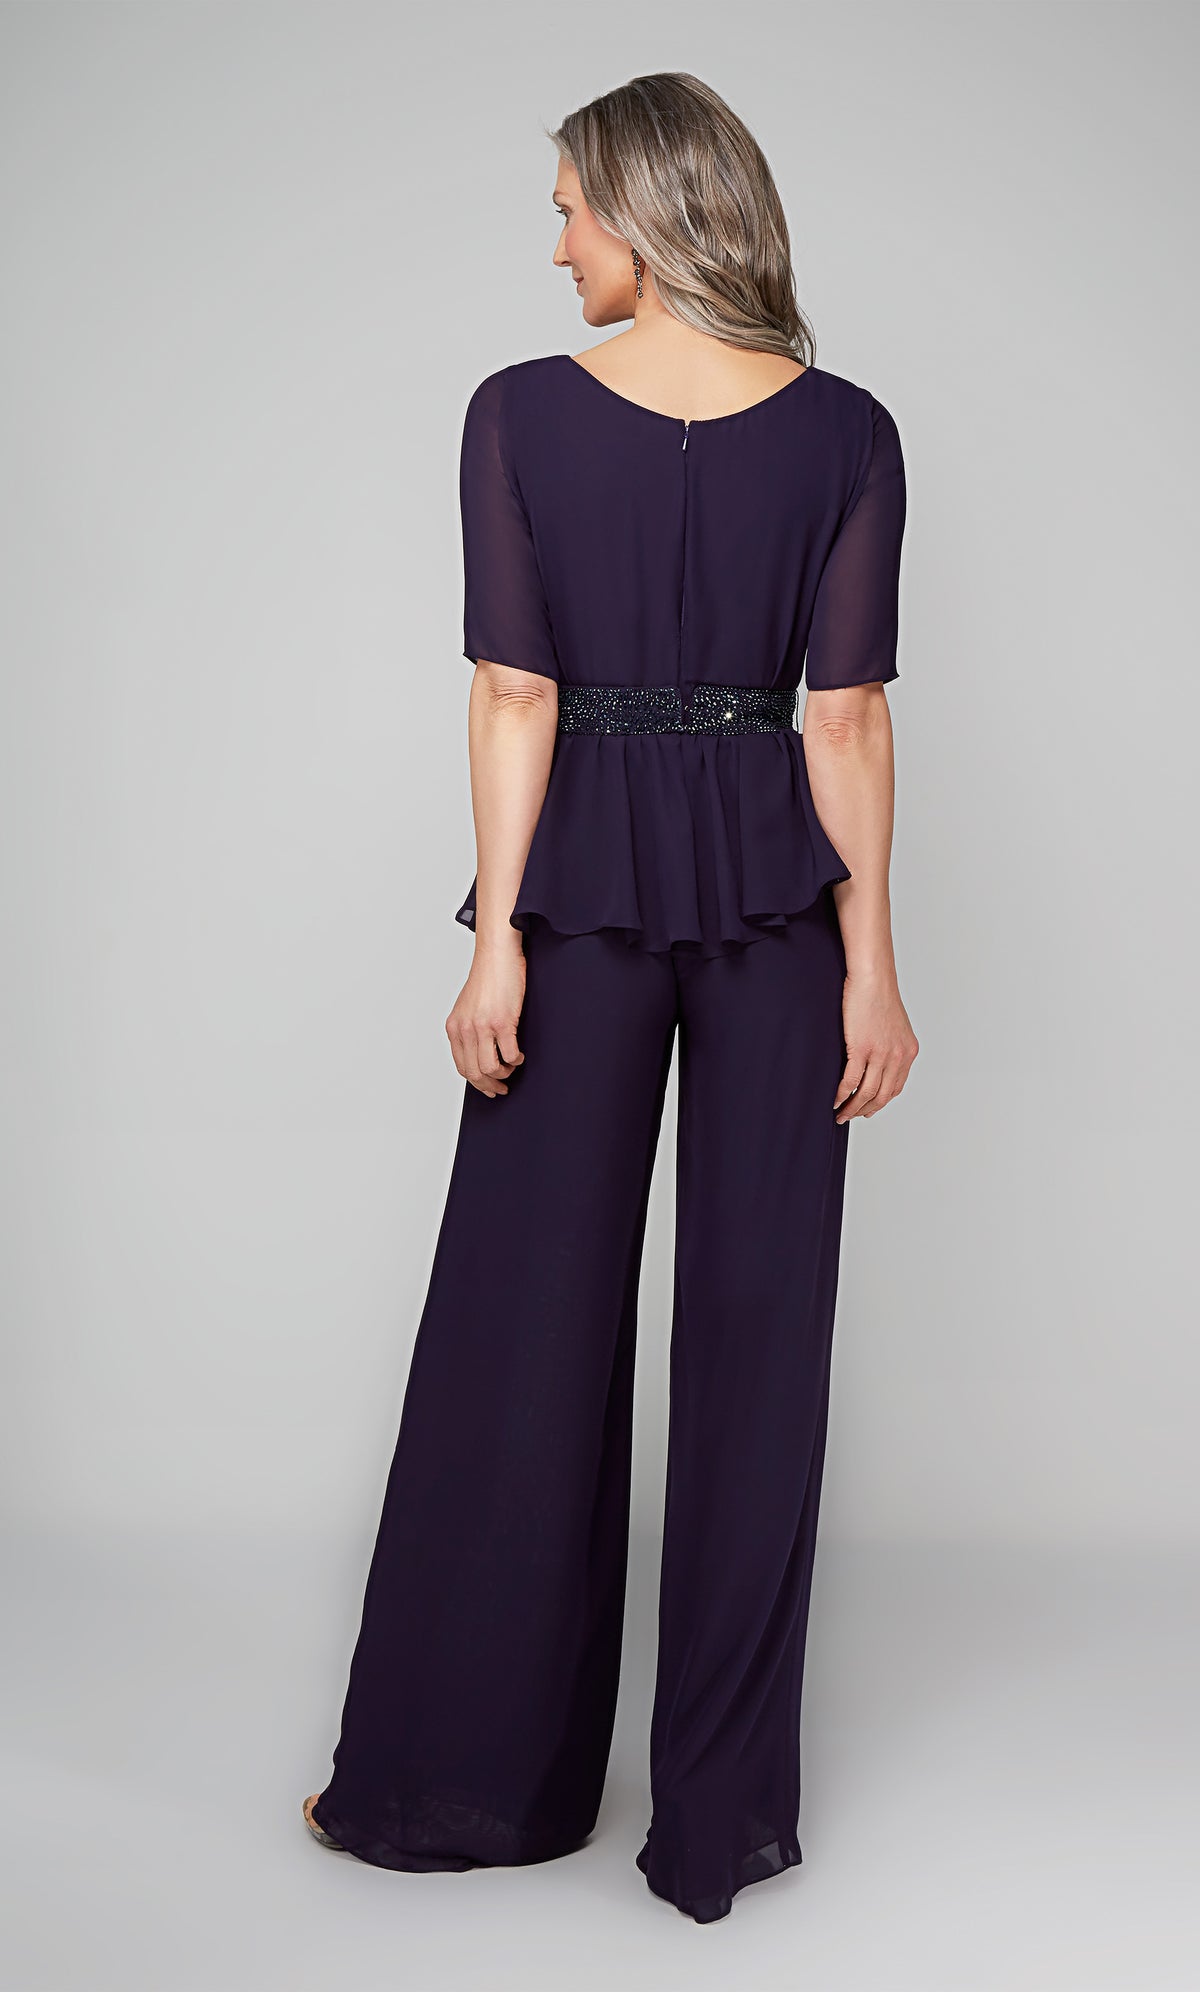 Formal jumpsuit with short sleeves and a faux beaded belt at the waist.